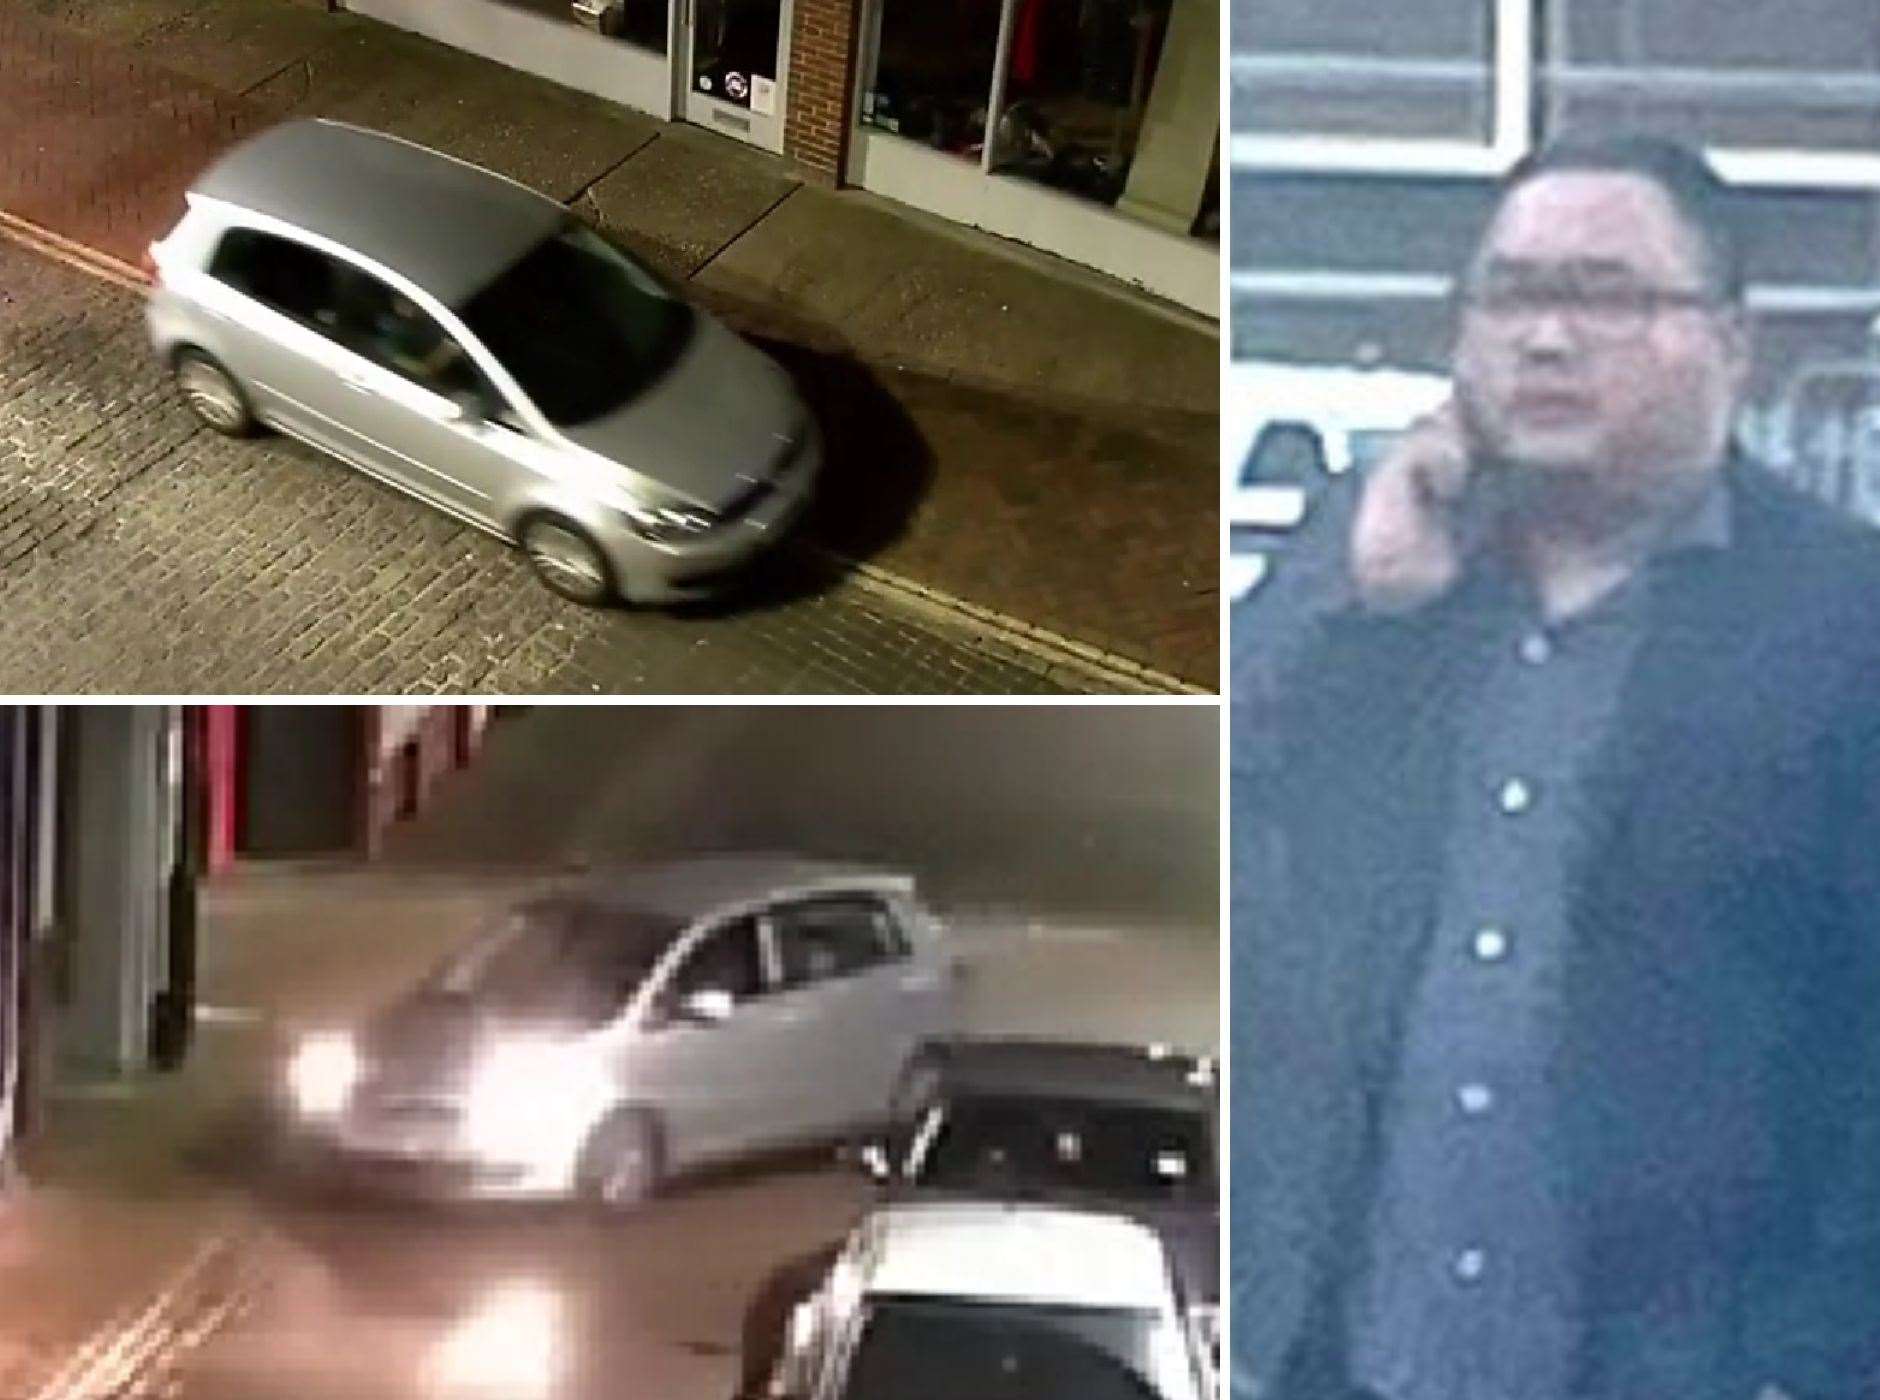 Ashmit Limbu narrowly avoided prison after his reckless driving was caught on CCTV